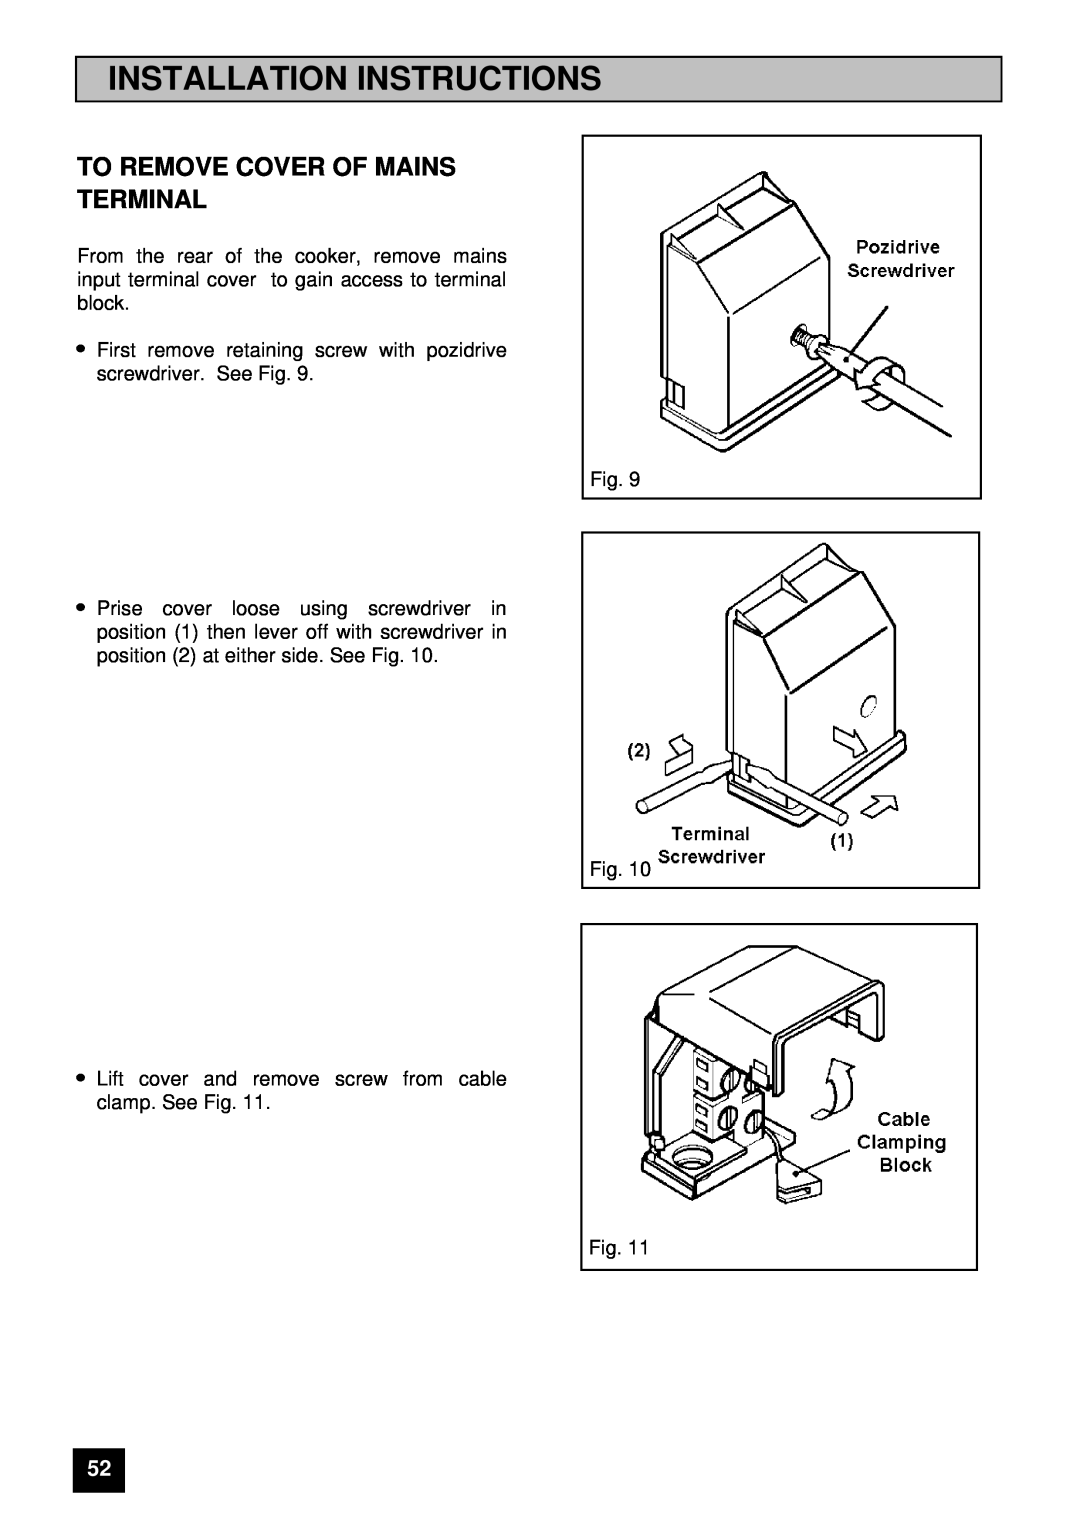 Tricity Bendix E 750 installation instructions To Remove Cover Of Mains Terminal, Installation Instructions 